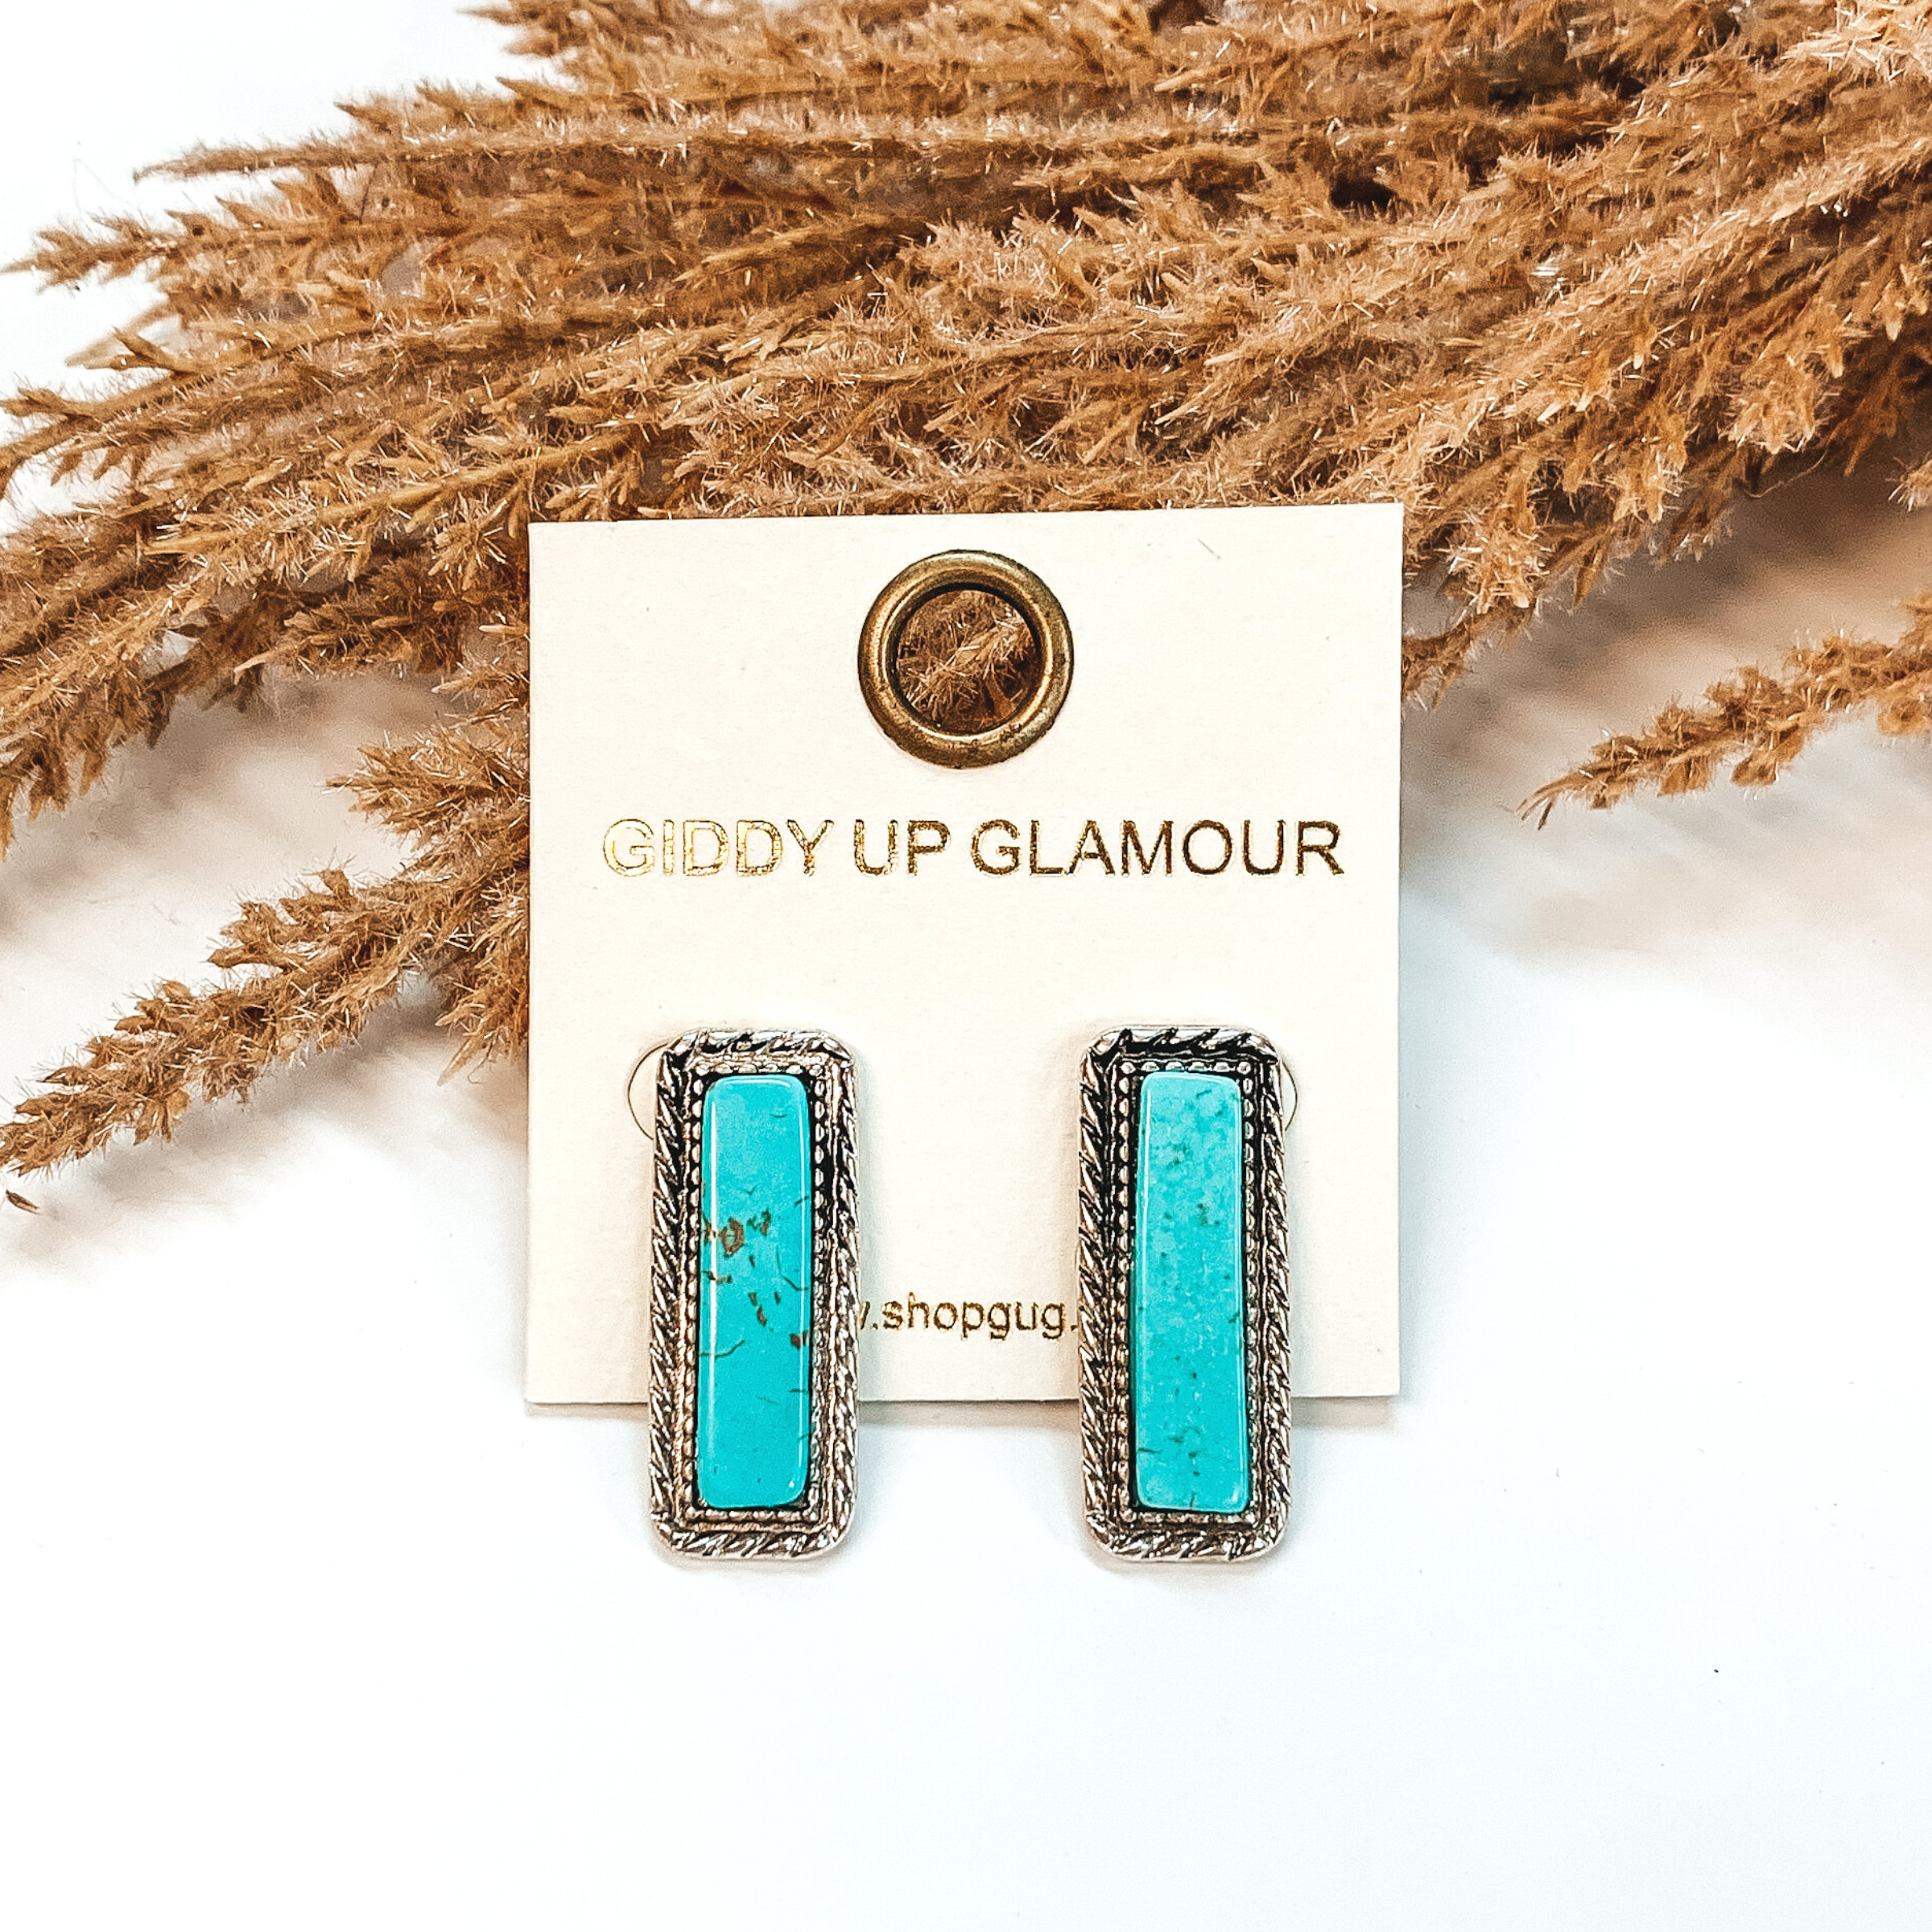 Silver rectangle stud earrings with a turquoise rectangle stone inlay. These earrings are pictured on a white background in front of brown floral decor. 